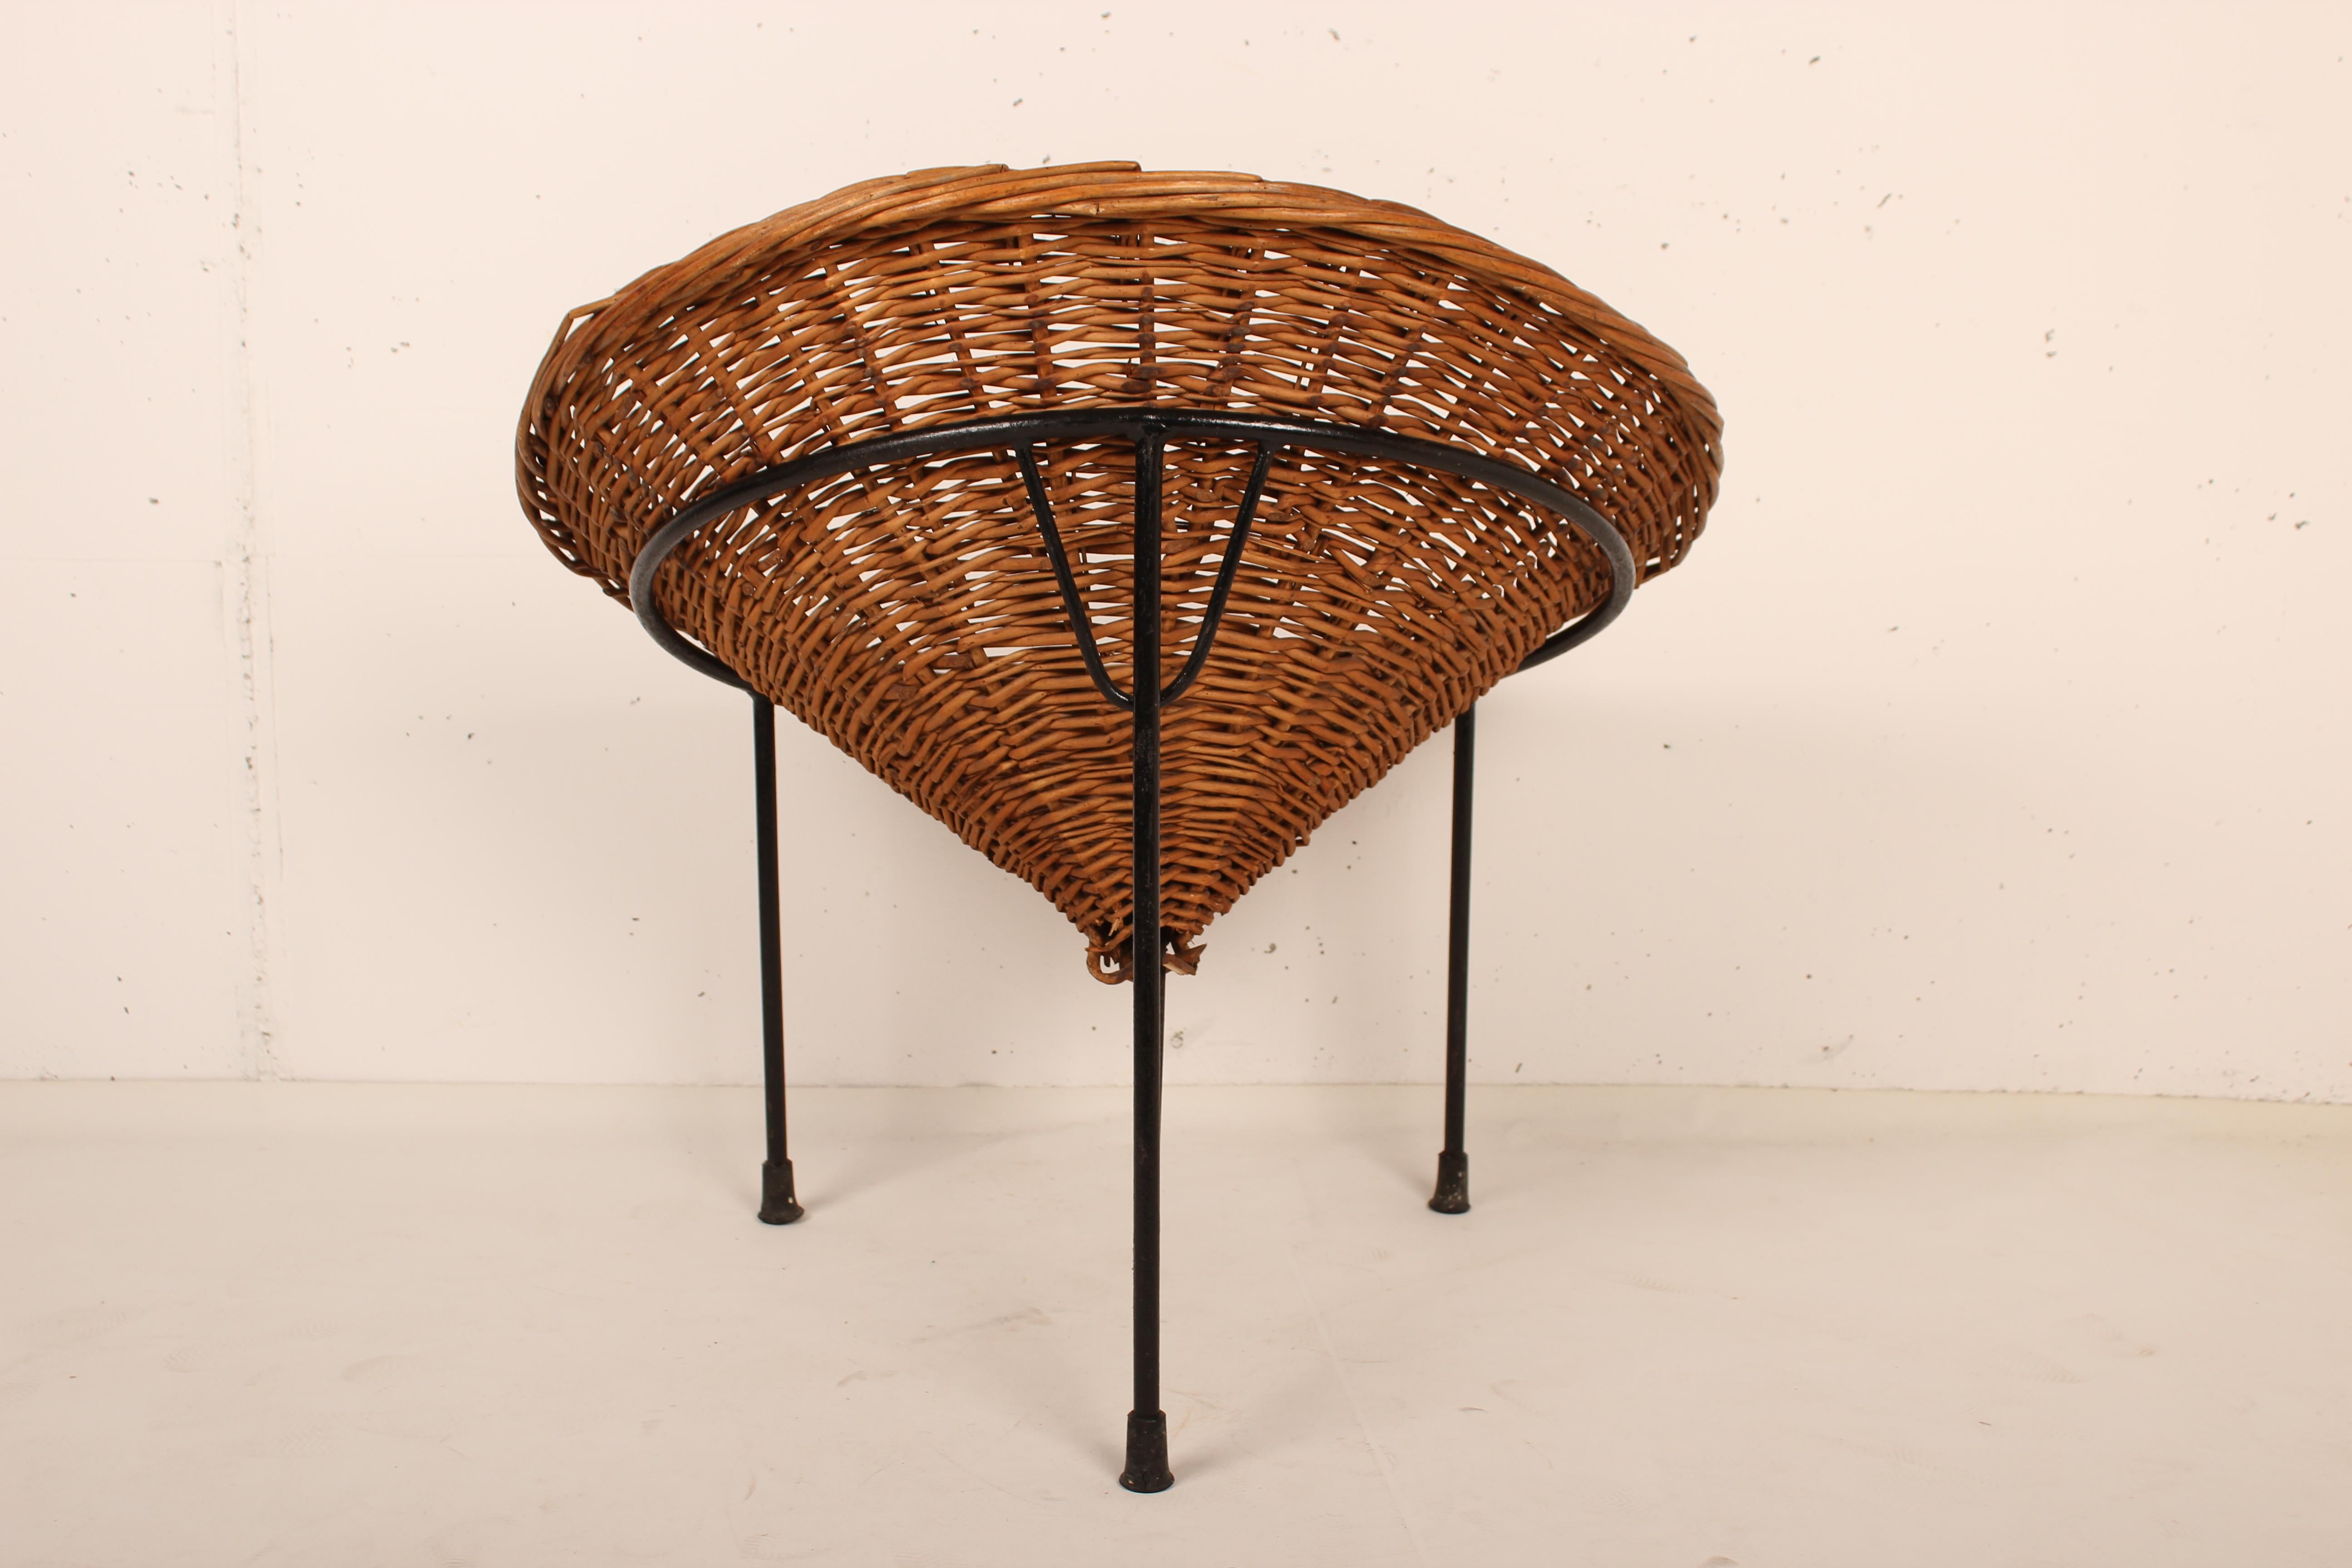 Wicker basket cone chair raised on a three legs wrought iron frame. By architect Roberto Mango for Tecno in 1954.